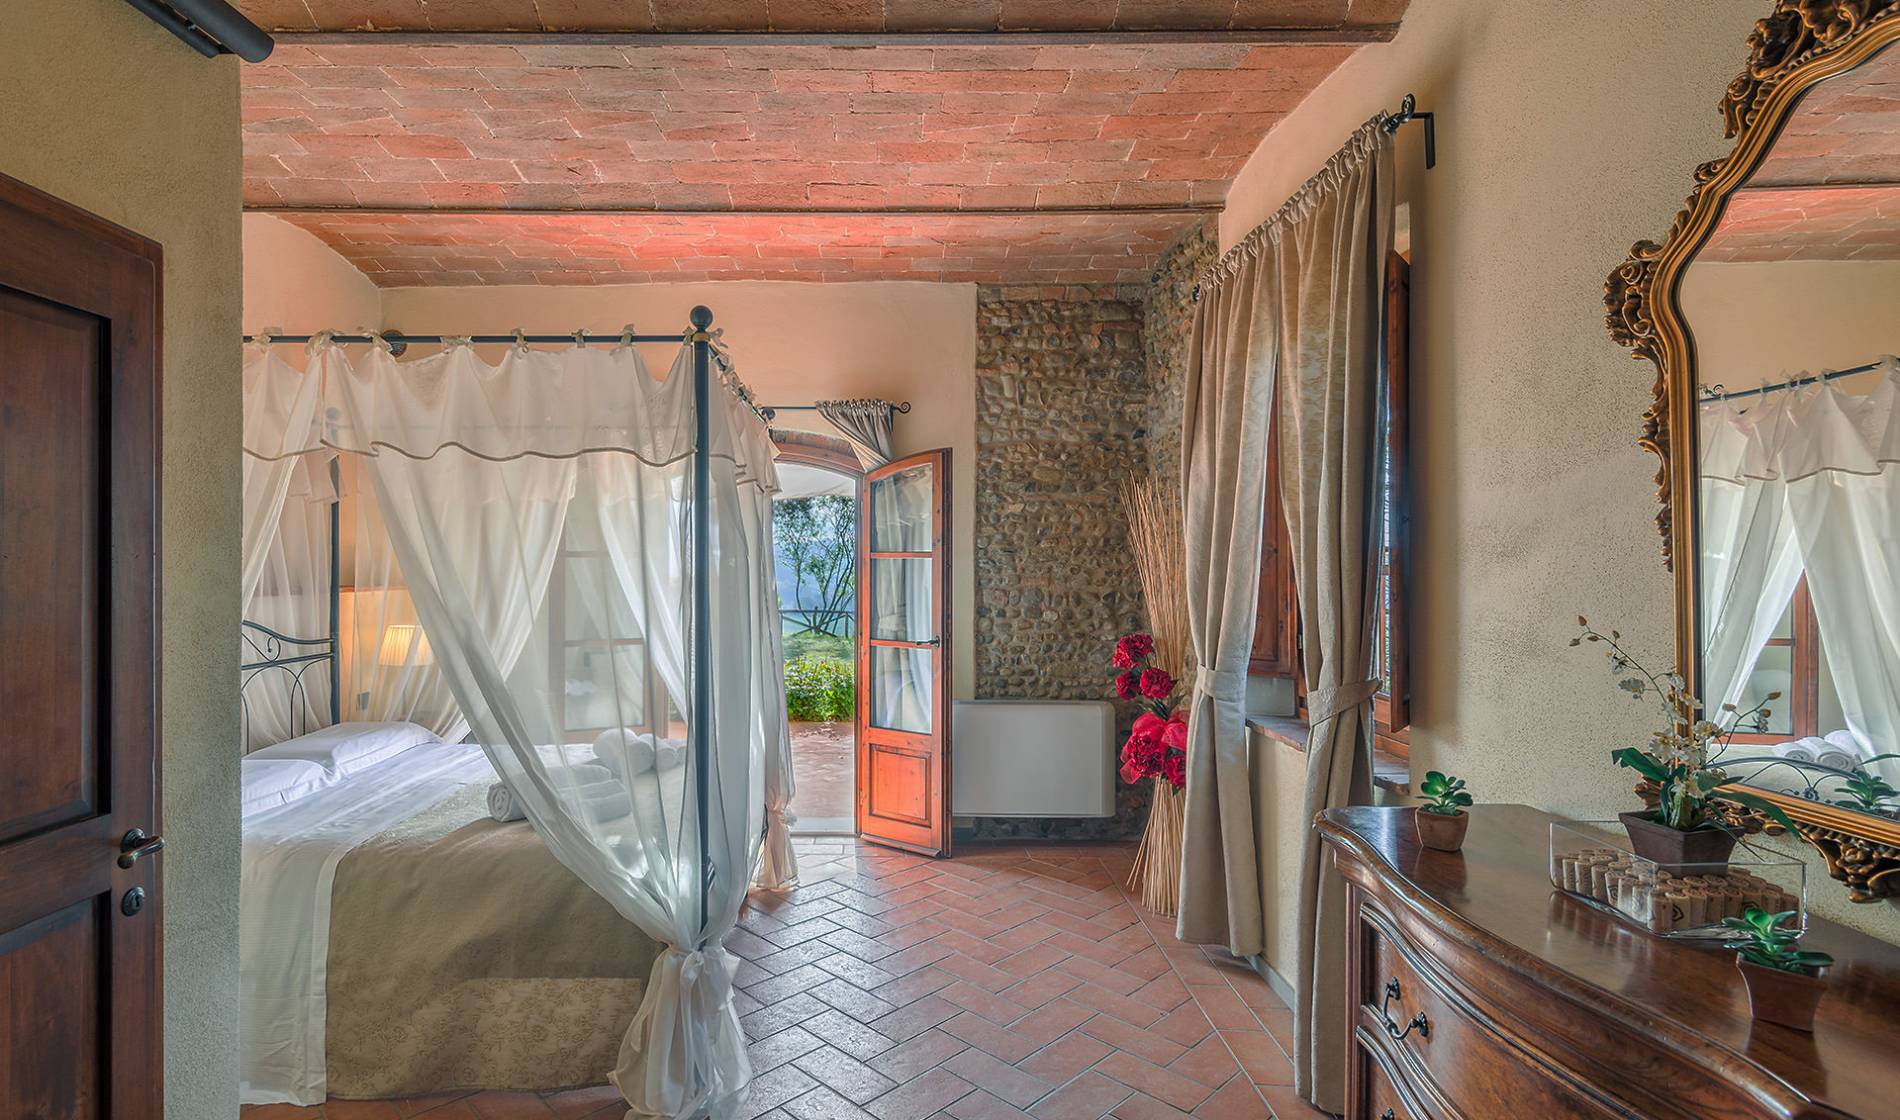 Rooms and Suites in the Tuscan style - Rooms and Suites in the Tuscan style